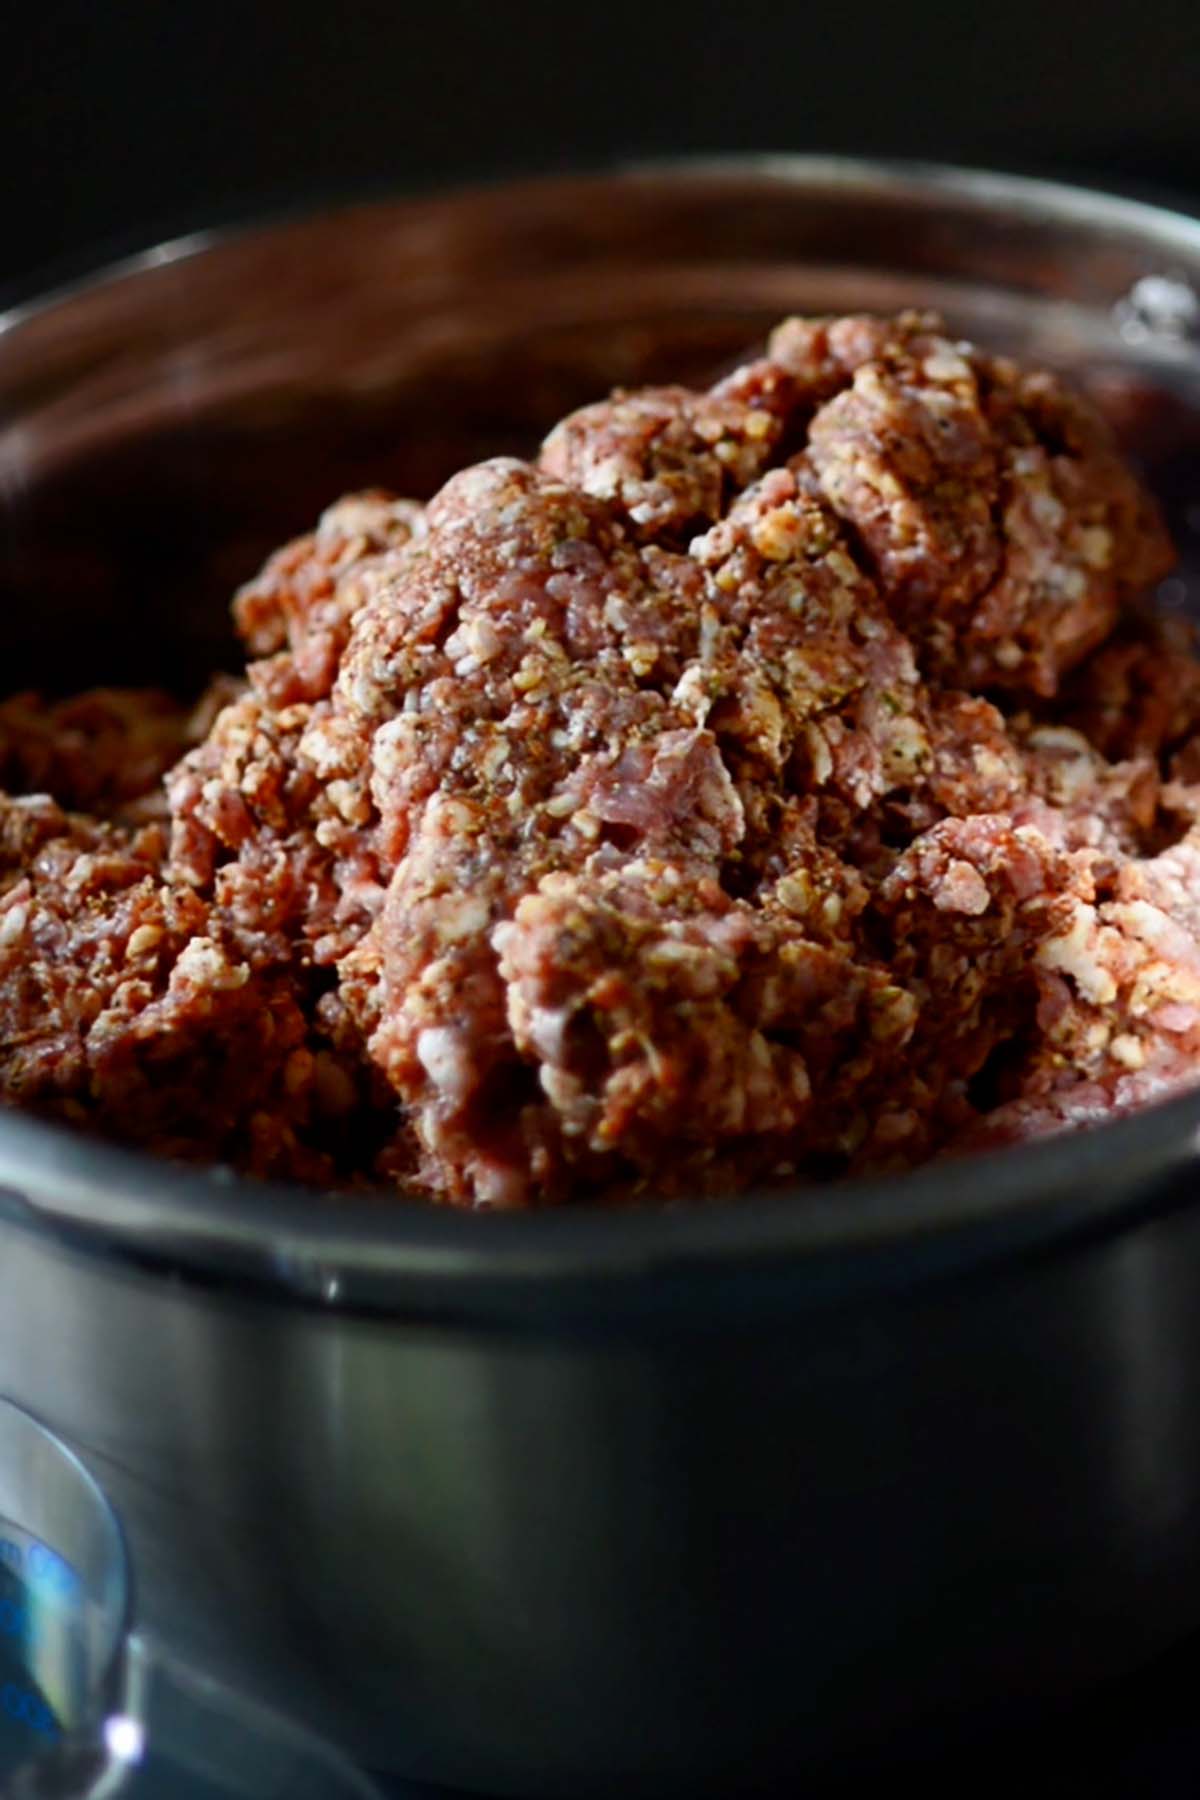 Ground veal and seasonings mixed thoroughly into ground pork shoulder in a mixing bowl.